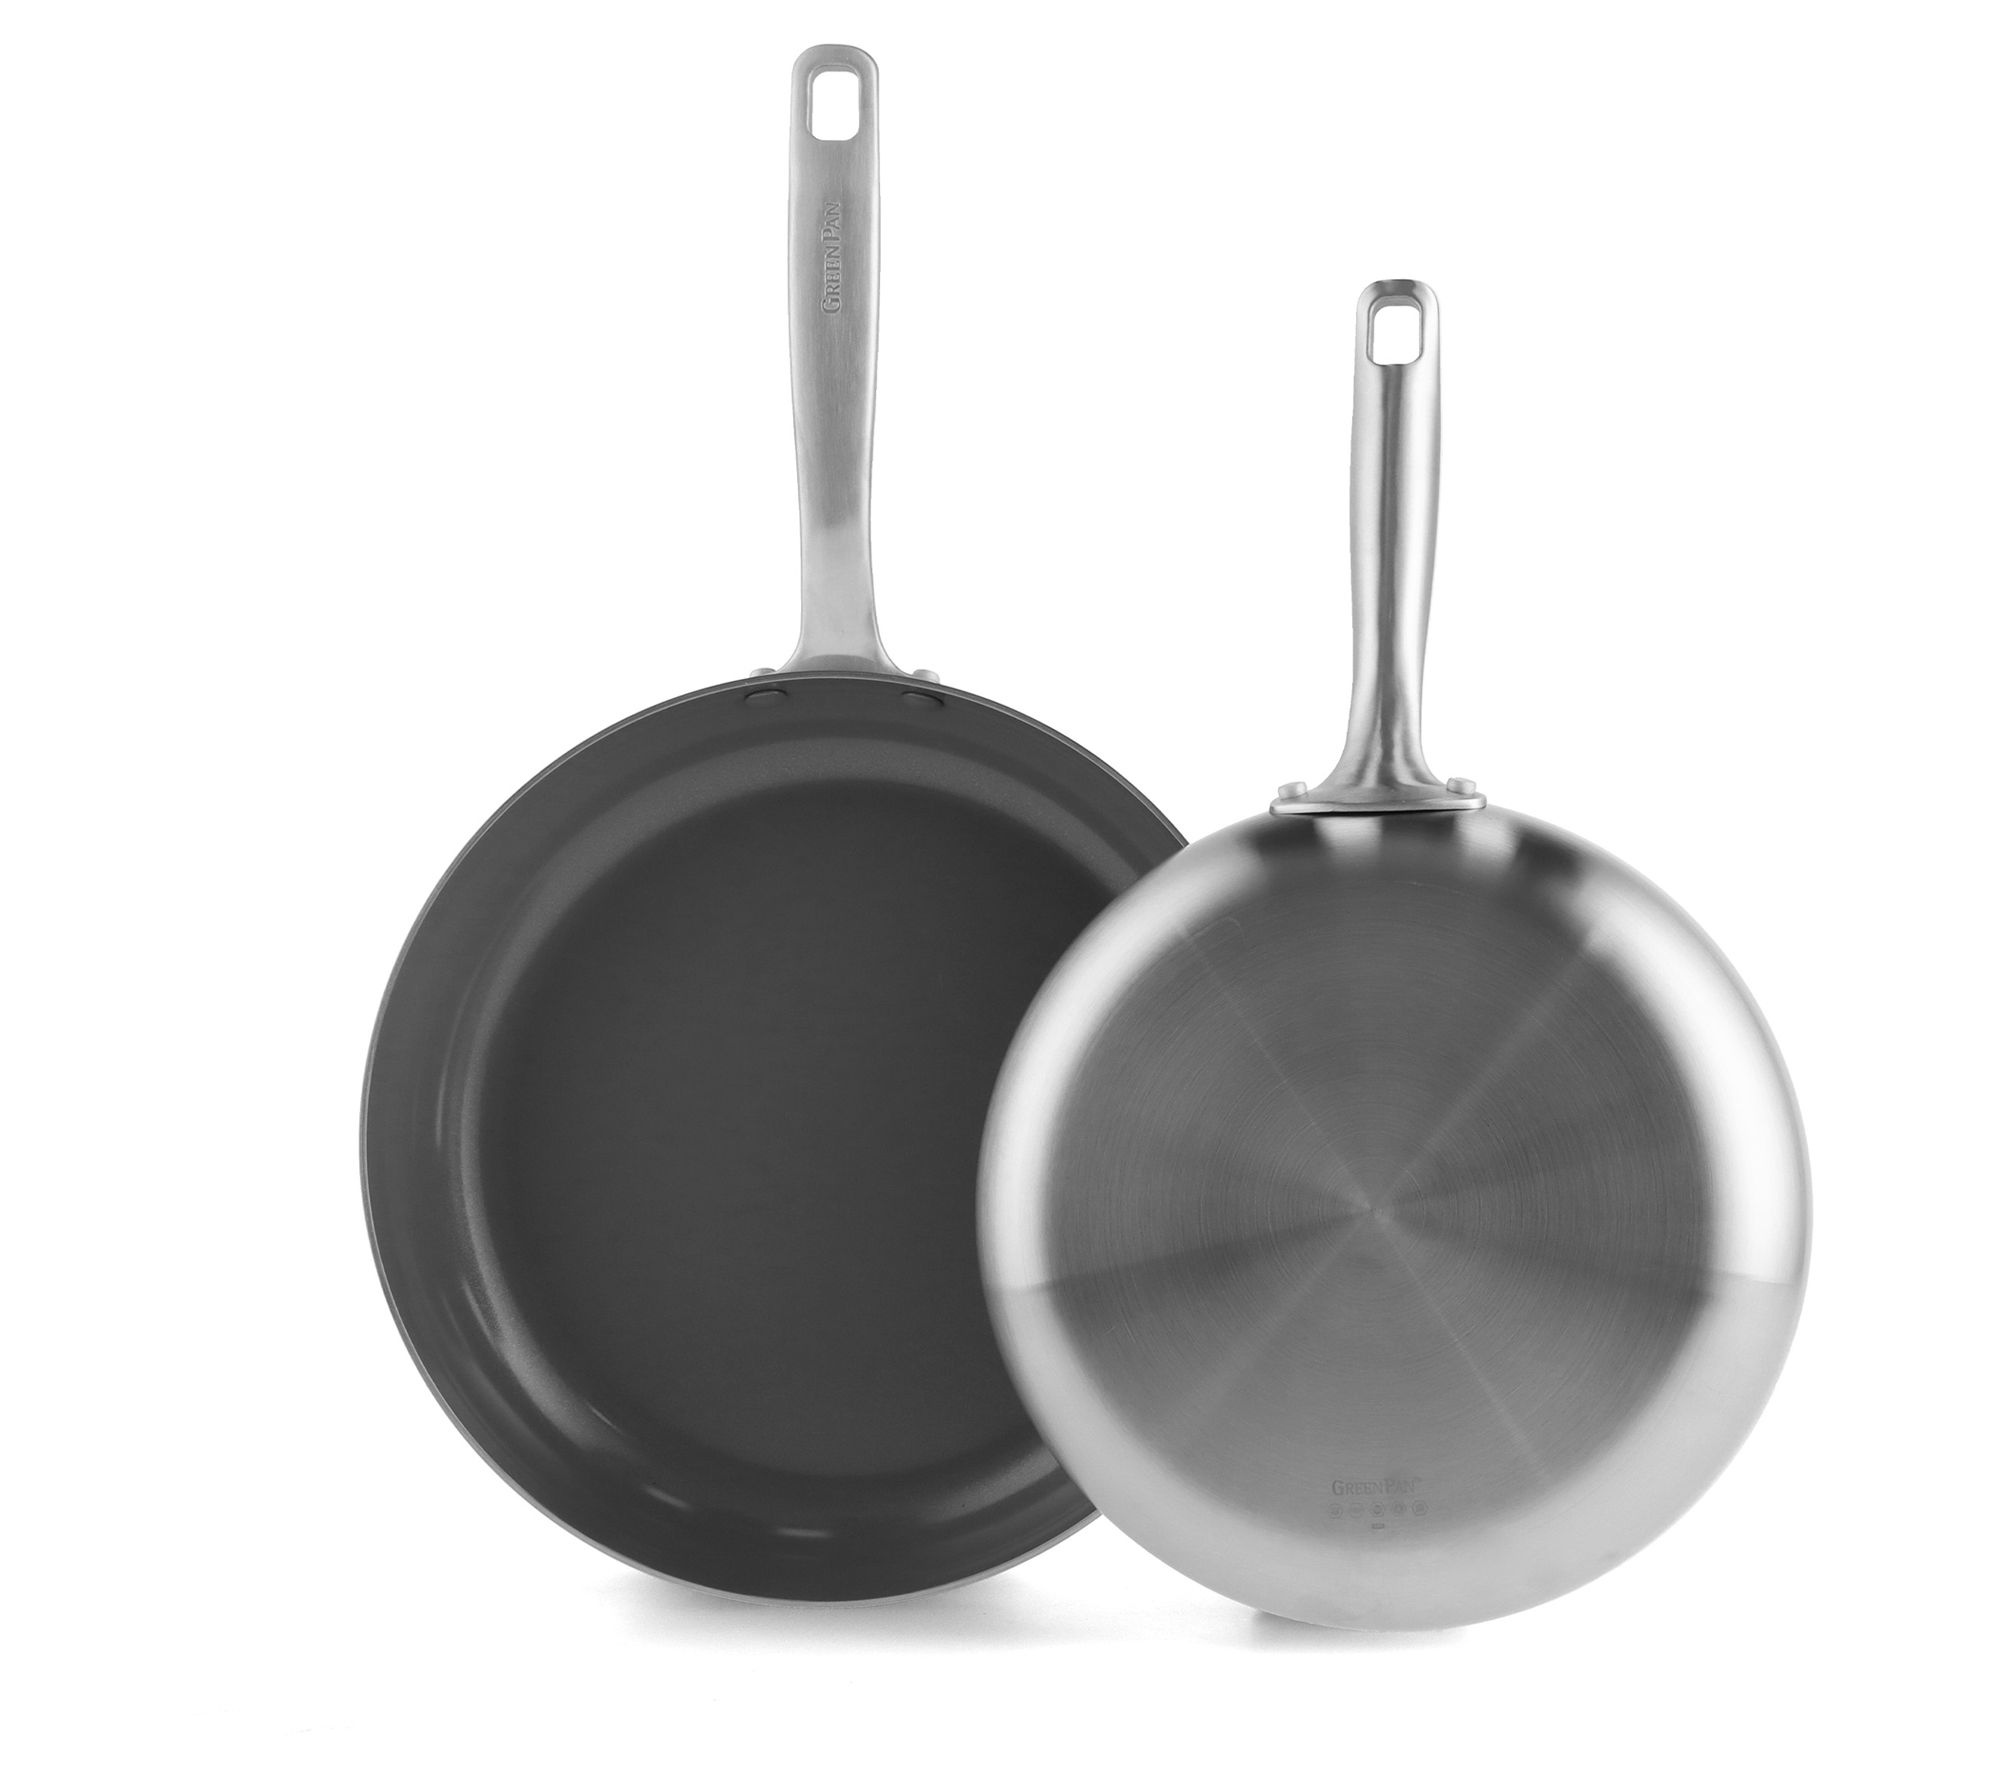 Oxo 2pc Mira Tri-ply Stainless Steel Frypan Set Silver : Target